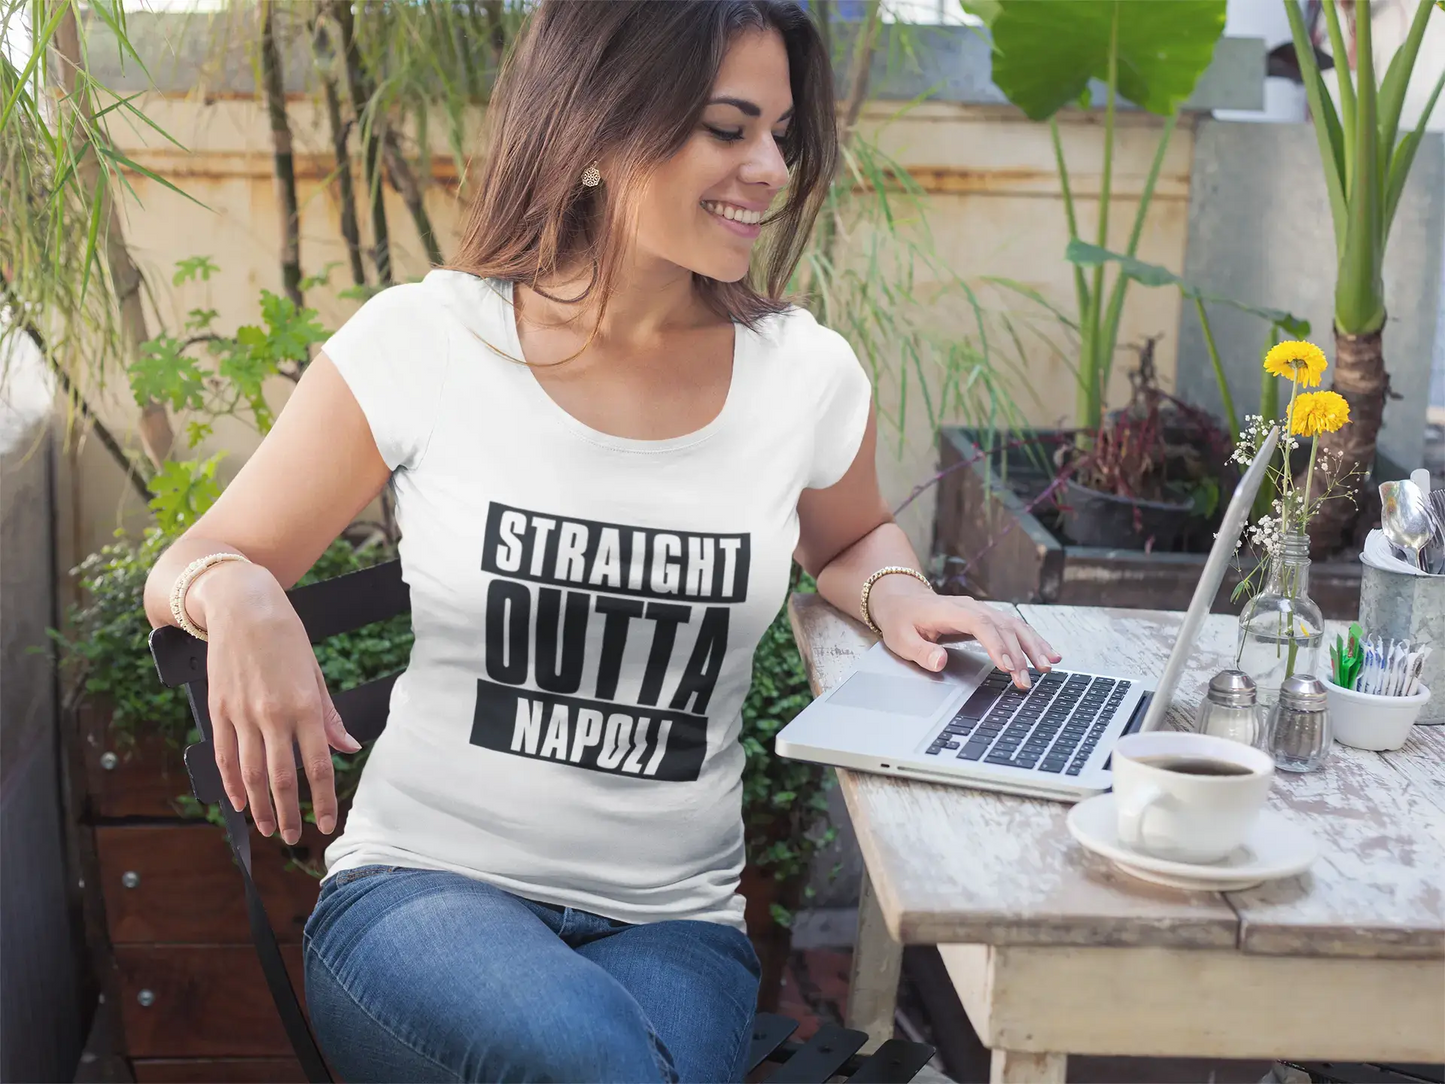 Straight Outta Napoli Women'S Short Sleeve Round Neck T-Shirt, 100% Cotton, Available In SizeS XS, S, M, L, Xl. 00026